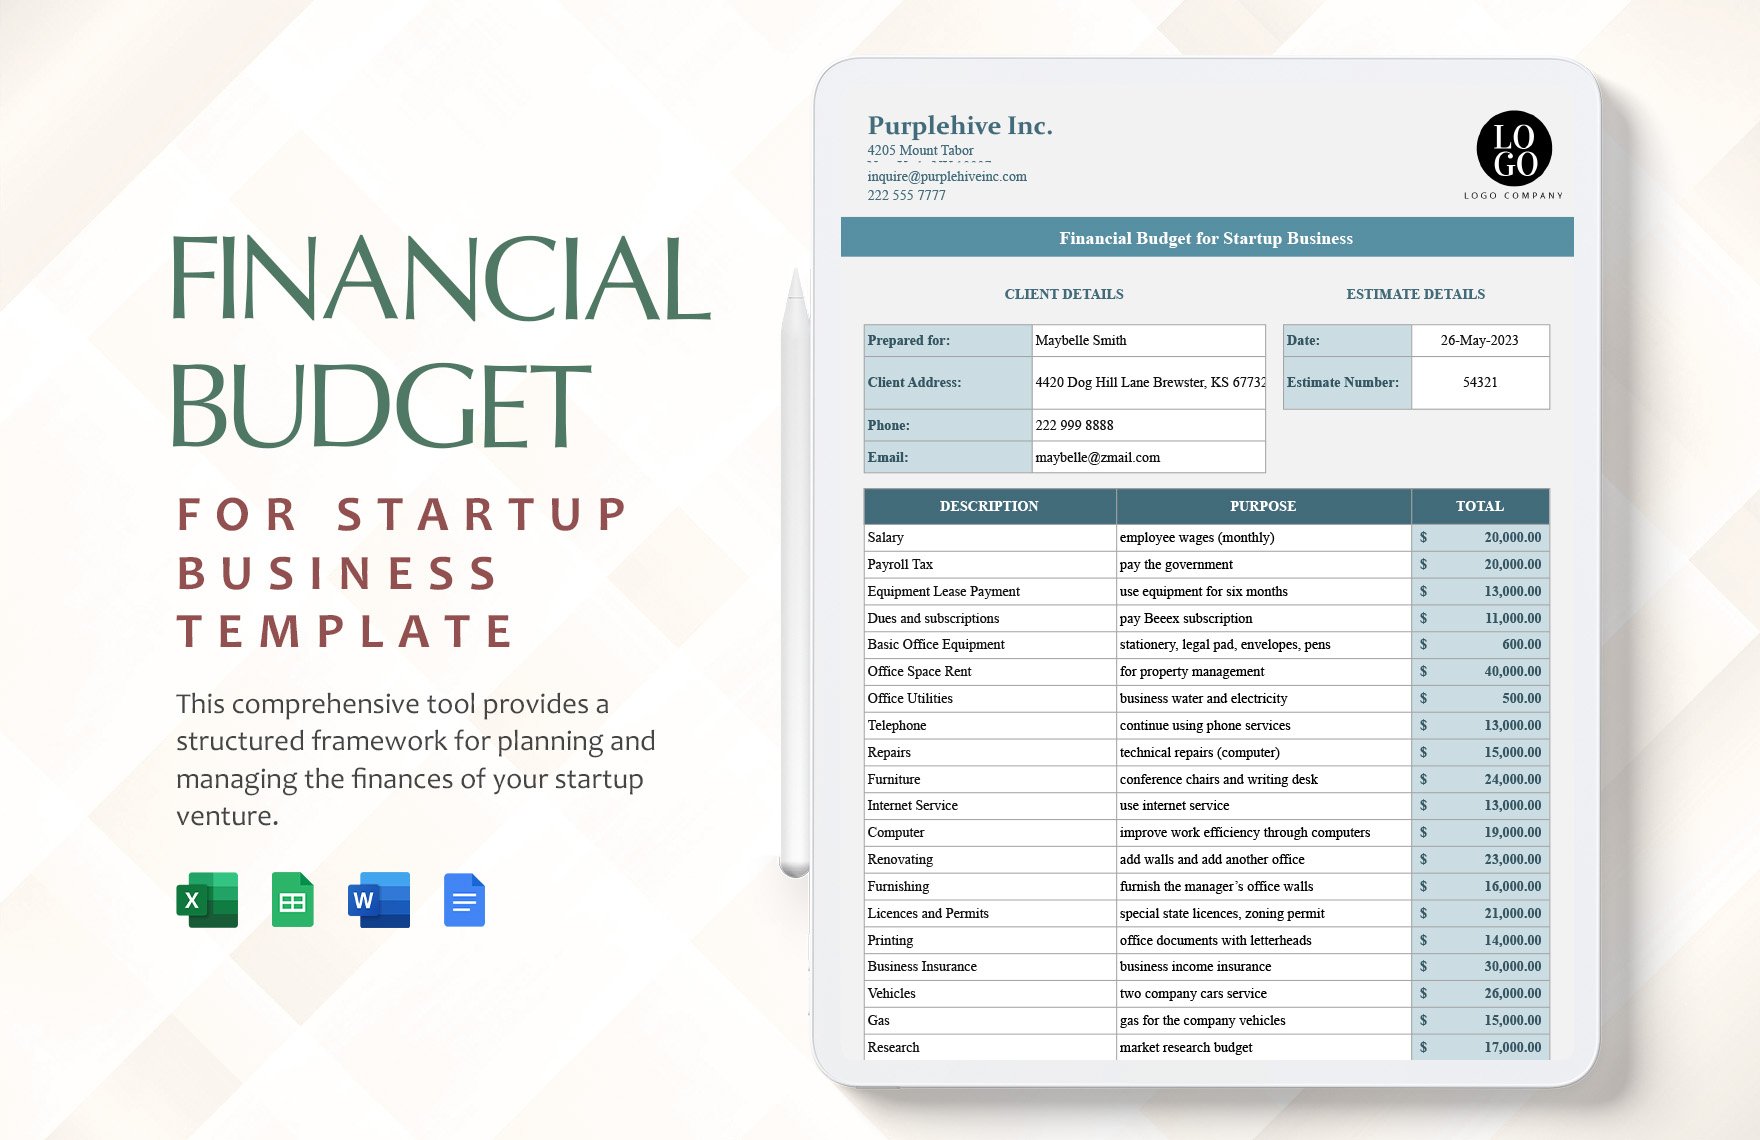 Financial Budget for Startup Business Template in Word, Google Docs, Excel, Google Sheets